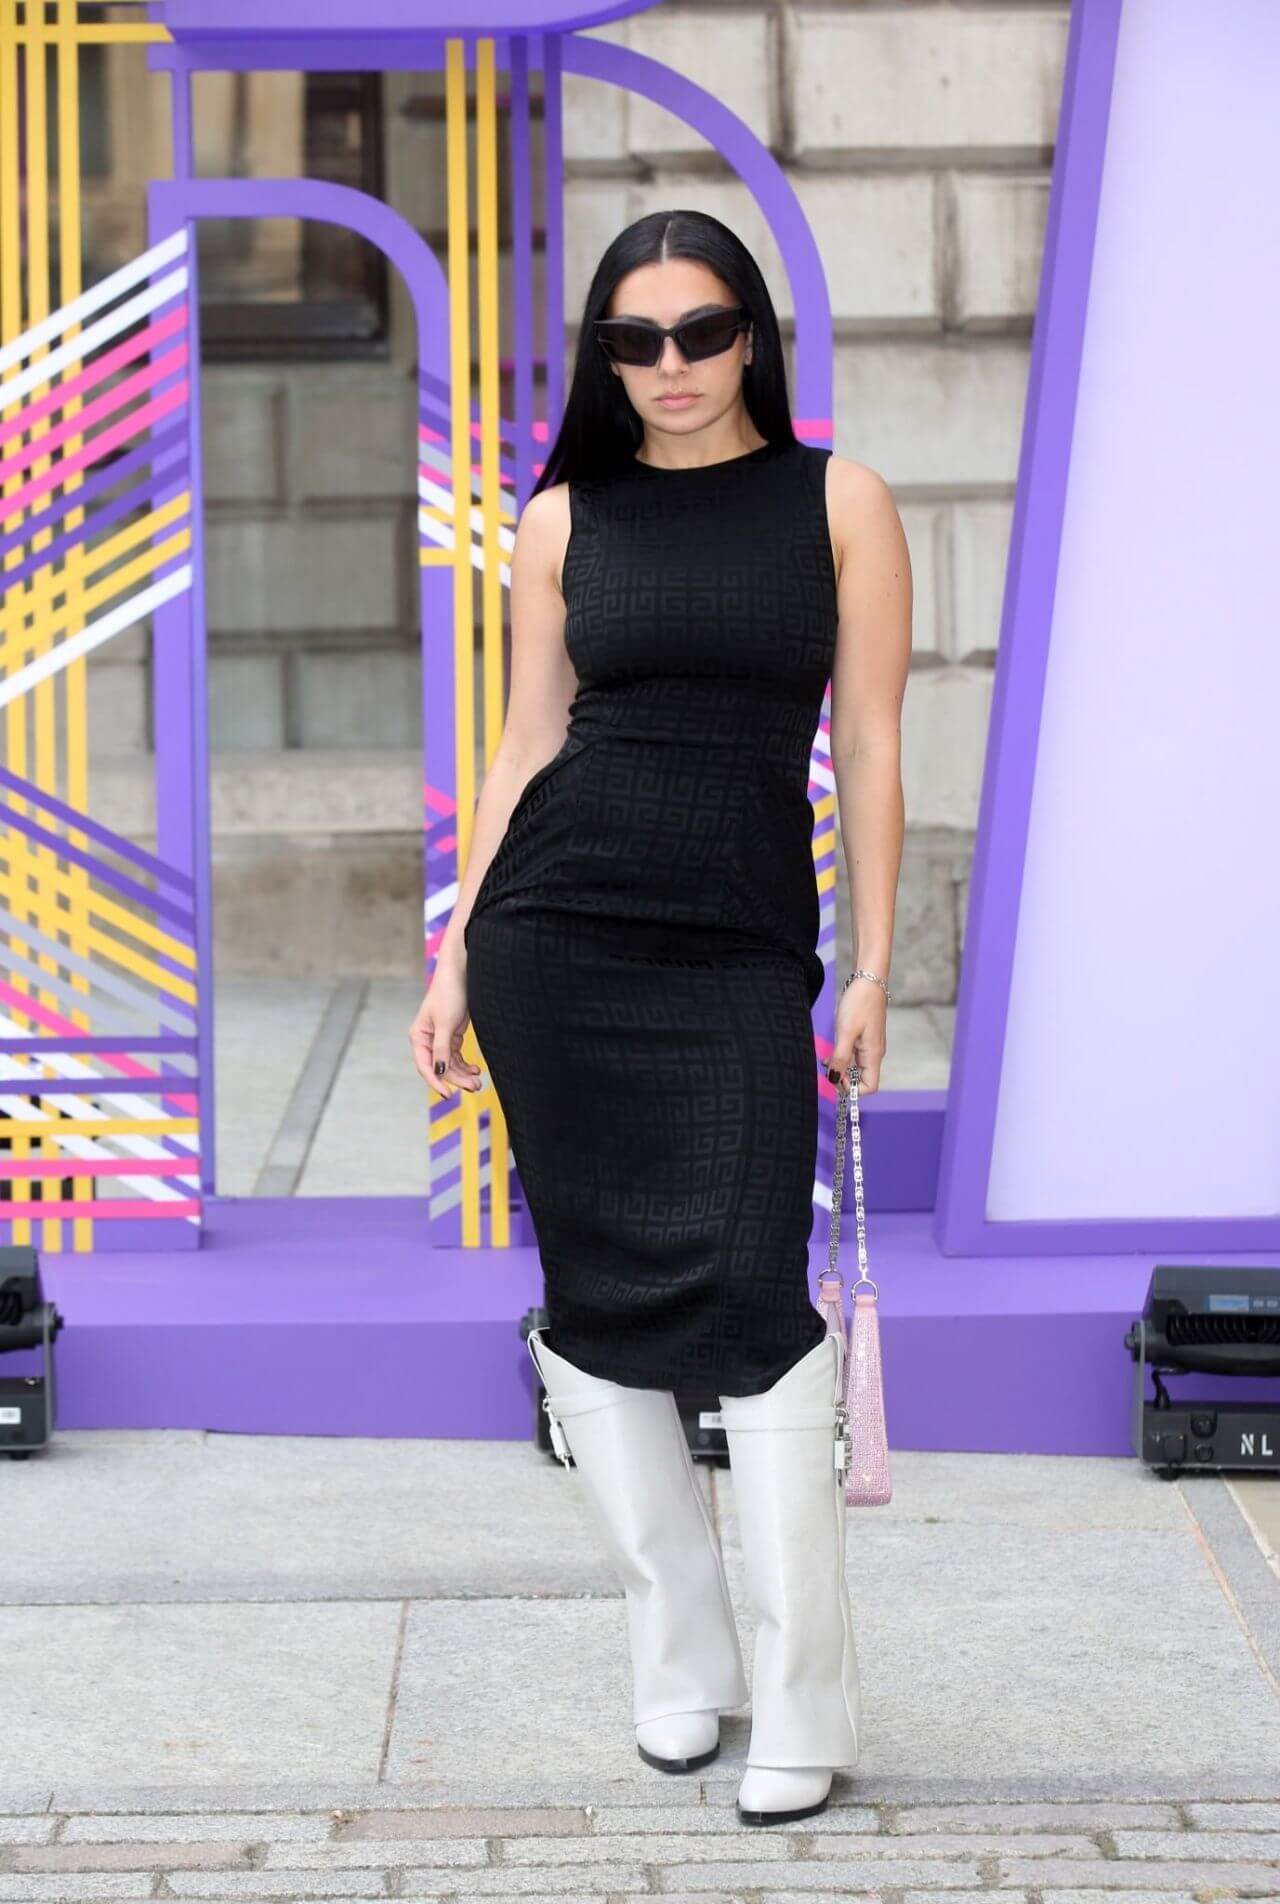 Charli XCX  Fabulous Looks In Black Sleeveless Bodycon Dress With White Boots